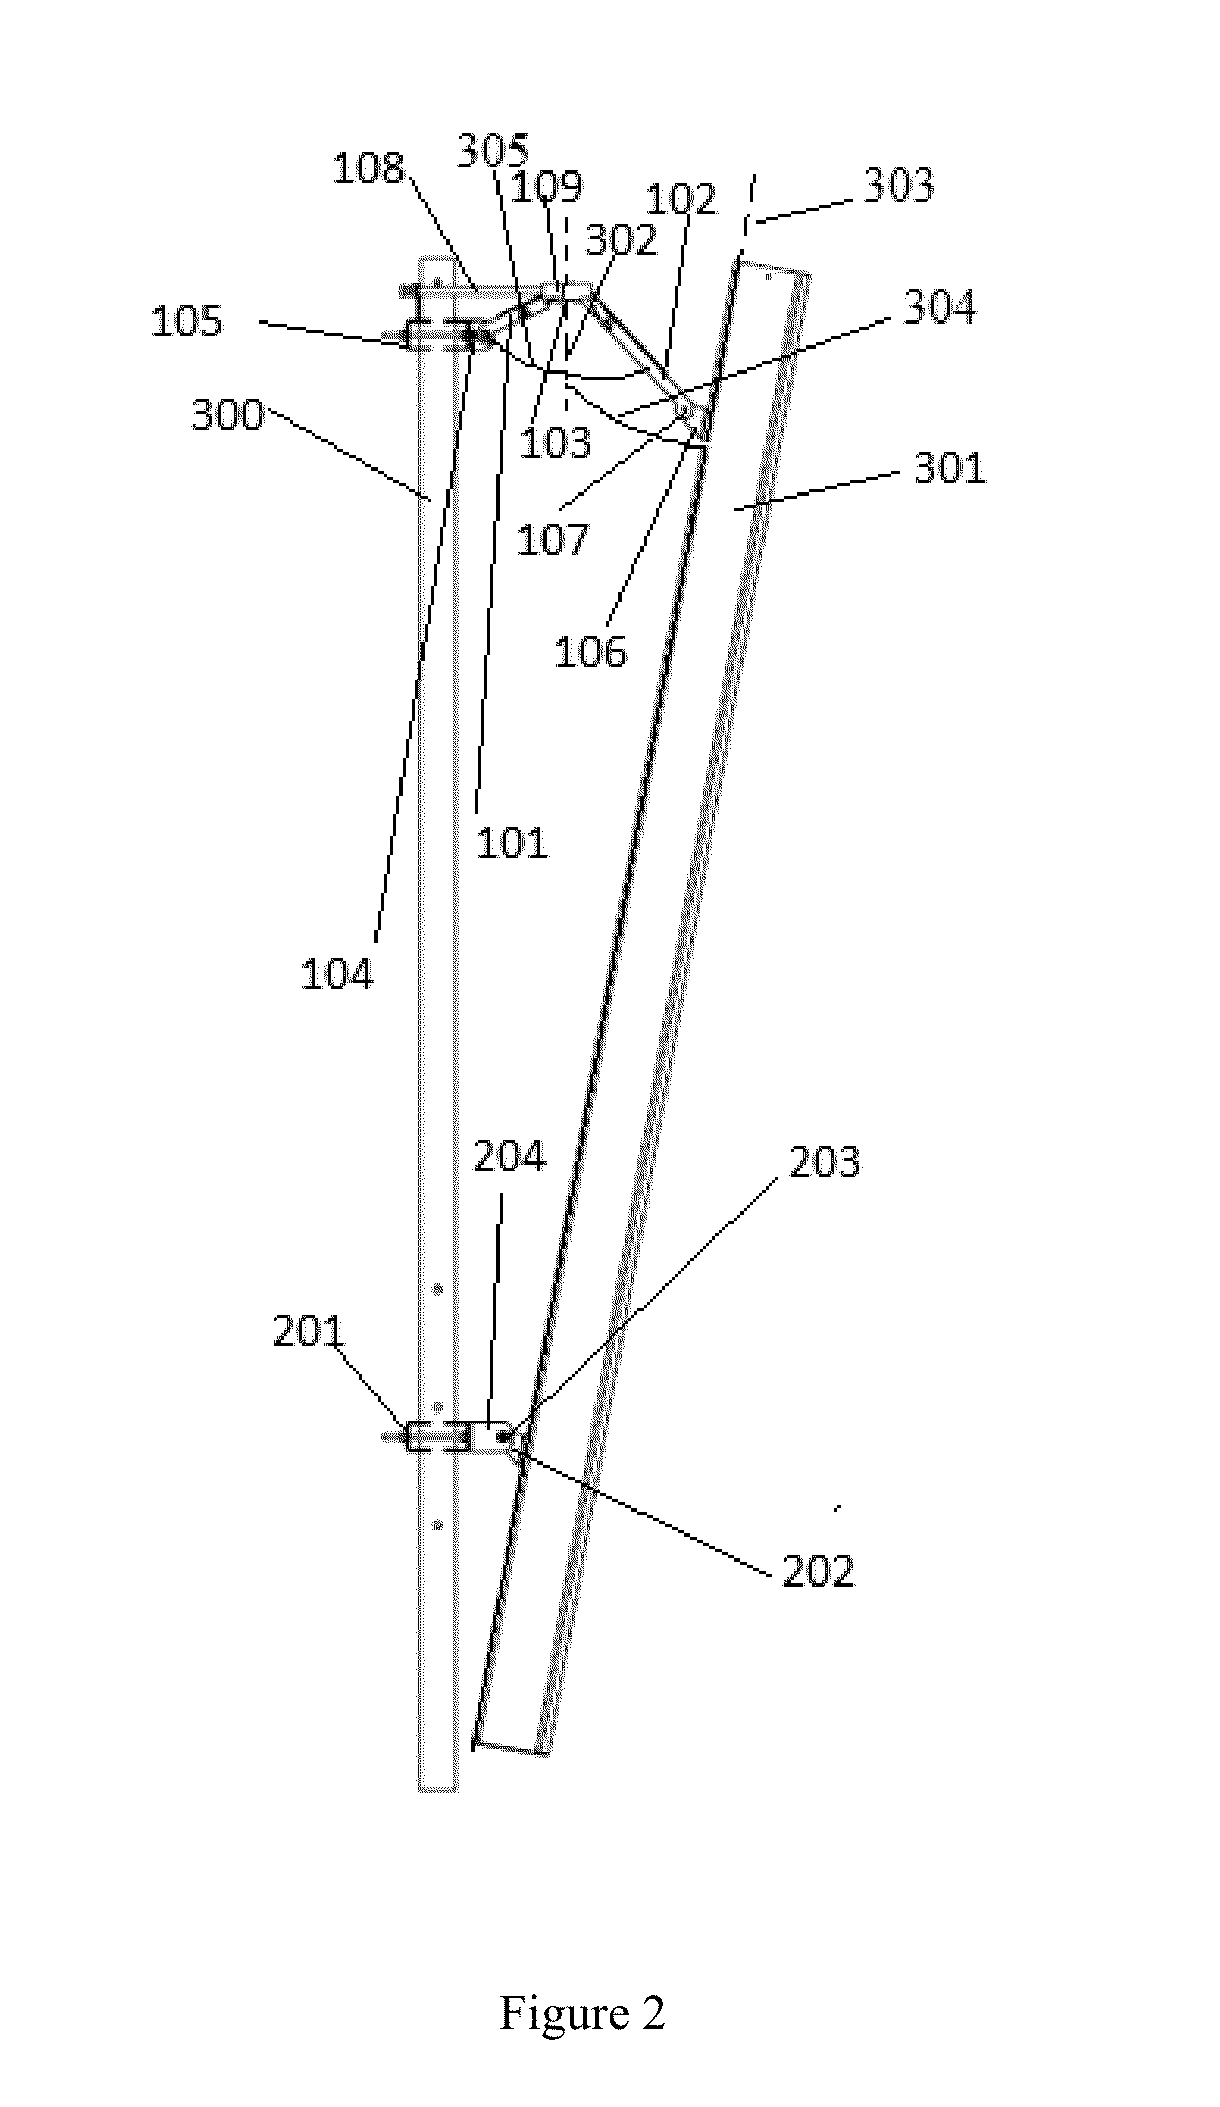 Apparatus for adjusting the tilt angle of an antenna